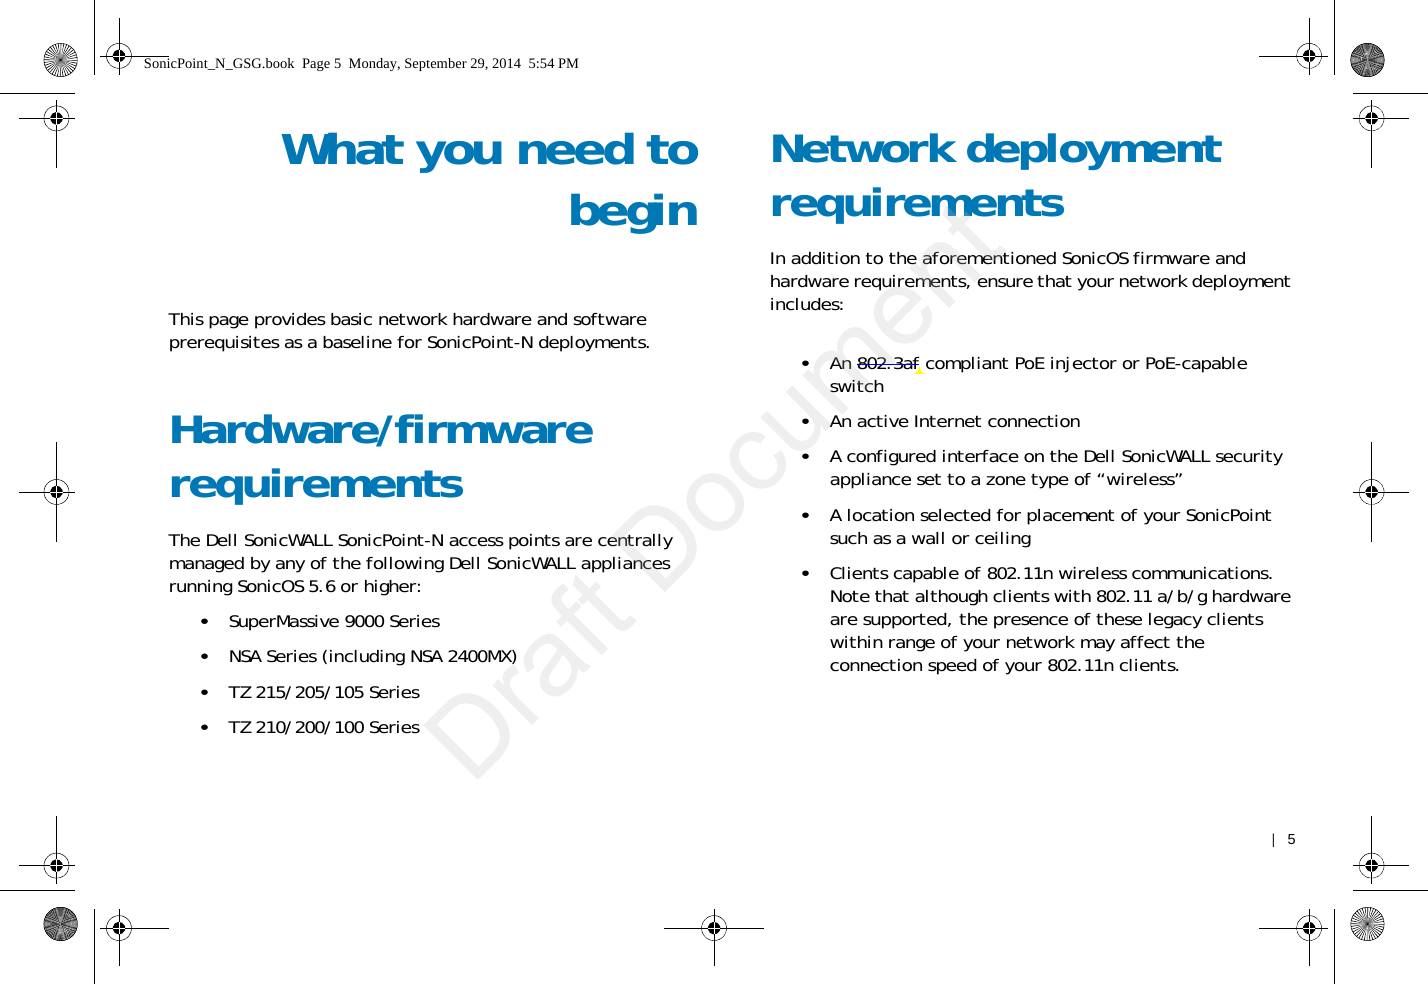    |   5What you need tobeginThis page provides basic network hardware and software prerequisites as a baseline for SonicPoint-N deployments. Hardware/firmware requirementsThe Dell SonicWALL SonicPoint-N access points are centrally managed by any of the following Dell SonicWALL appliances running SonicOS 5.6 or higher:•SuperMassive 9000 Series•NSA Series (including NSA 2400MX)•TZ 215/205/105 Series•TZ 210/200/100 SeriesNetwork deployment requirementsIn addition to the aforementioned SonicOS firmware and hardware requirements, ensure that your network deployment includes:•An 802.3af compliant PoE injector or PoE-capable switch•An active Internet connection•A configured interface on the Dell SonicWALL security appliance set to a zone type of “wireless”•A location selected for placement of your SonicPoint such as a wall or ceiling•Clients capable of 802.11n wireless communications. Note that although clients with 802.11 a/b/g hardware are supported, the presence of these legacy clients within range of your network may affect the connection speed of your 802.11n clients. SonicPoint_N_GSG.book  Page 5  Monday, September 29, 2014  5:54 PMDraft Document